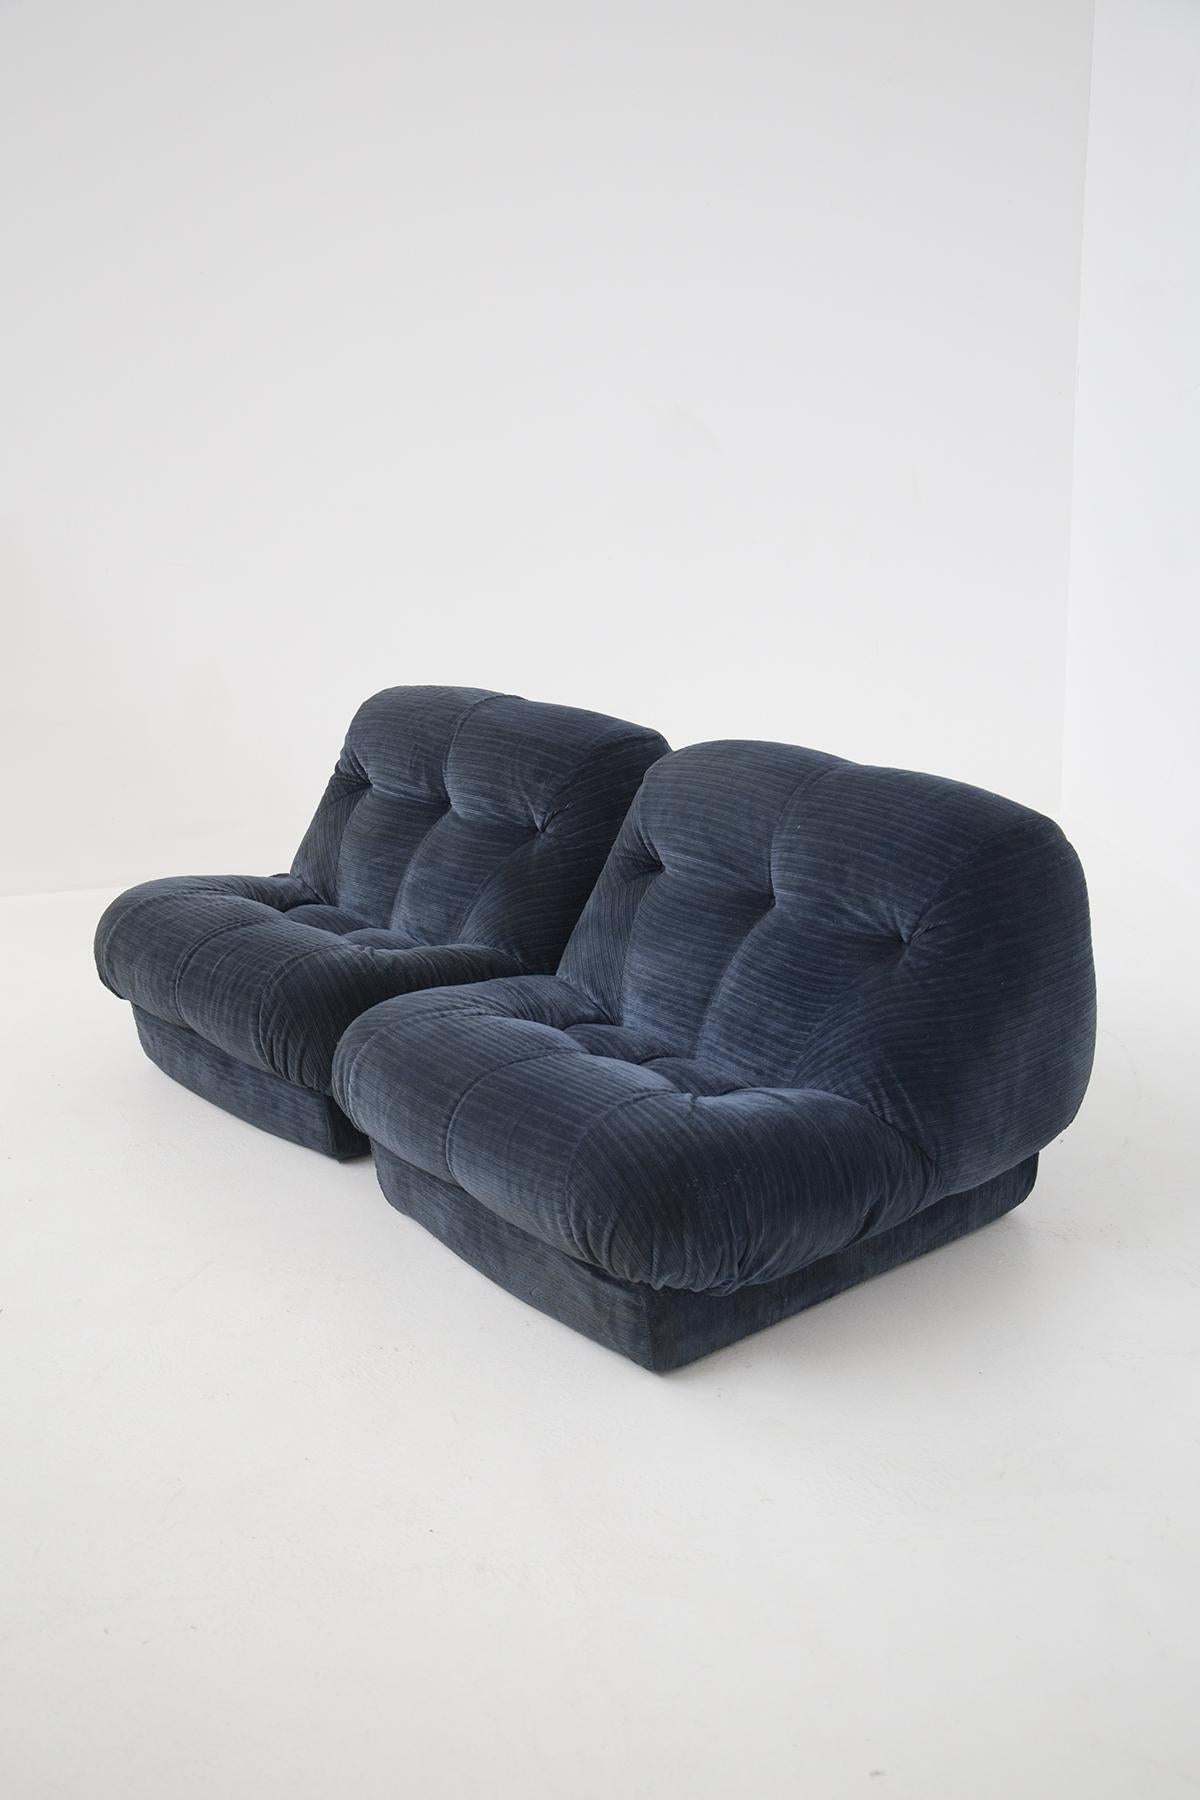 Wonderful set Nuvolone composed by two armchairs and a coffee table by Maturi made in the 70's, of fine Italian manufacture.
The set is composed of two armchairs in ultramarine blue corduroy, very elegant and stylish. They have very particular